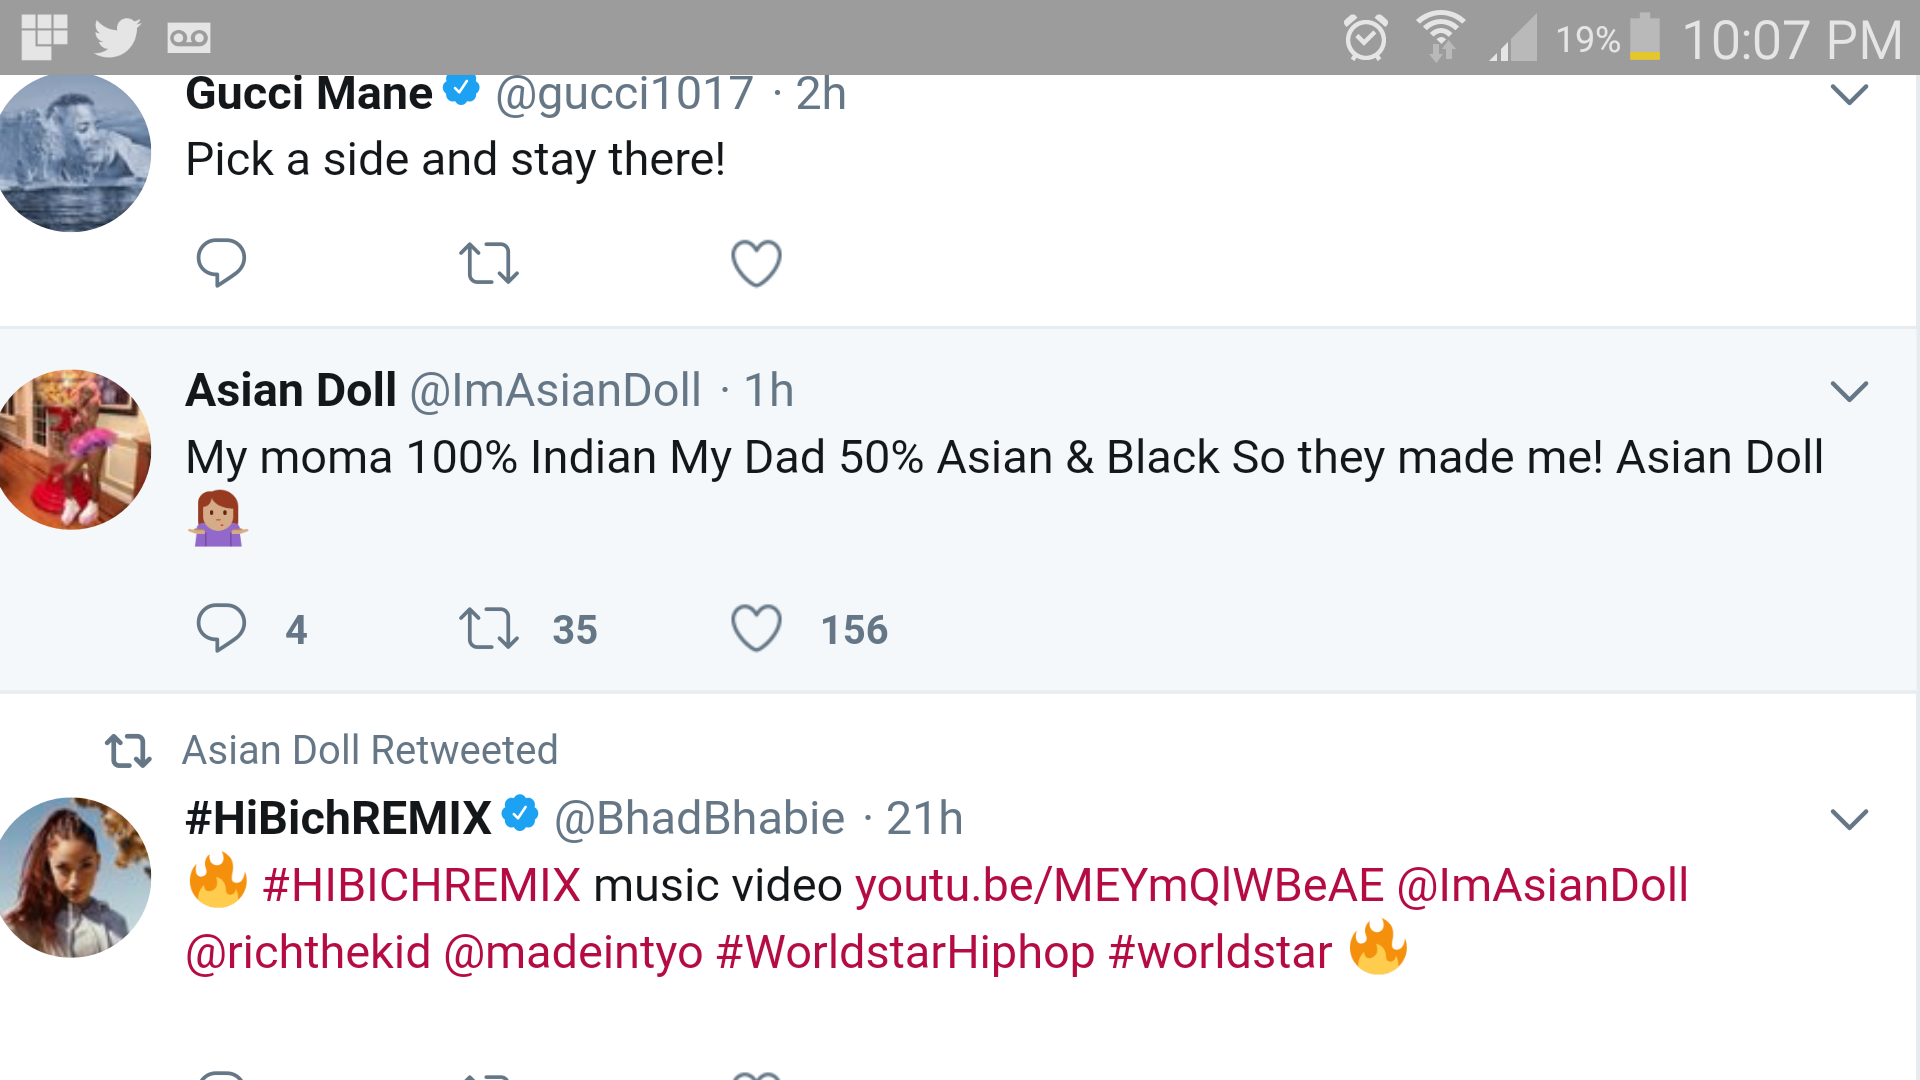 Asian Doll Is Mad And Cussing People Out Over A Tweet Calling Her